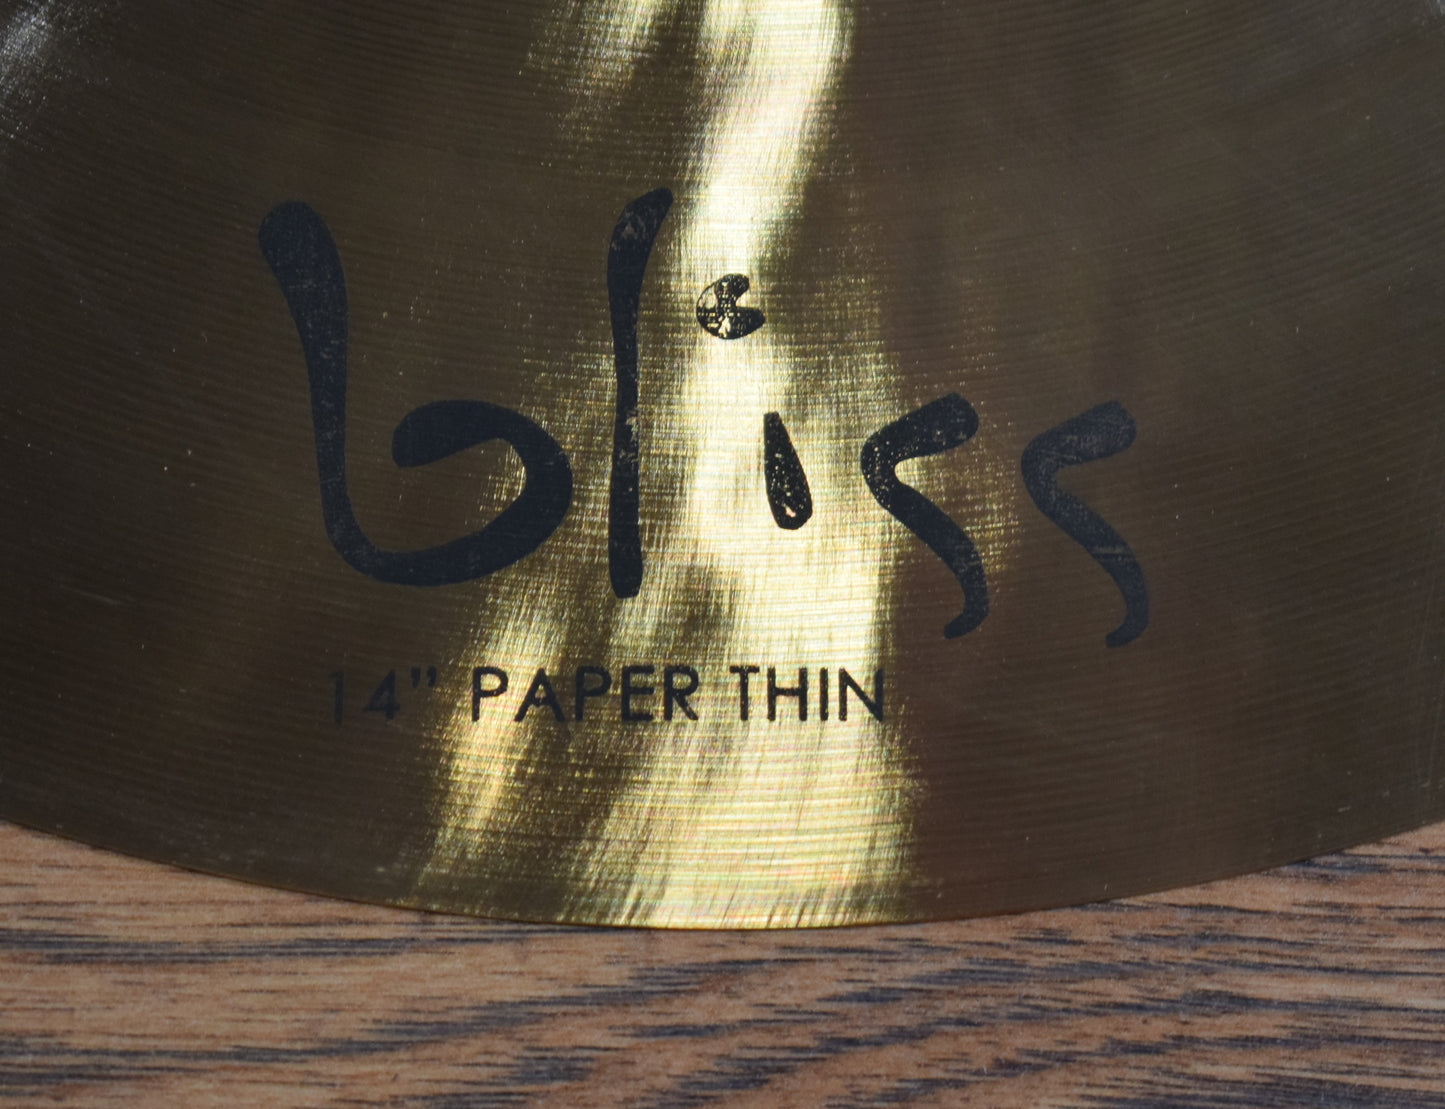 Dream Cymbals BPT14 Bliss Hand Forged & Hammered 14" Paper Thin Crash Demo